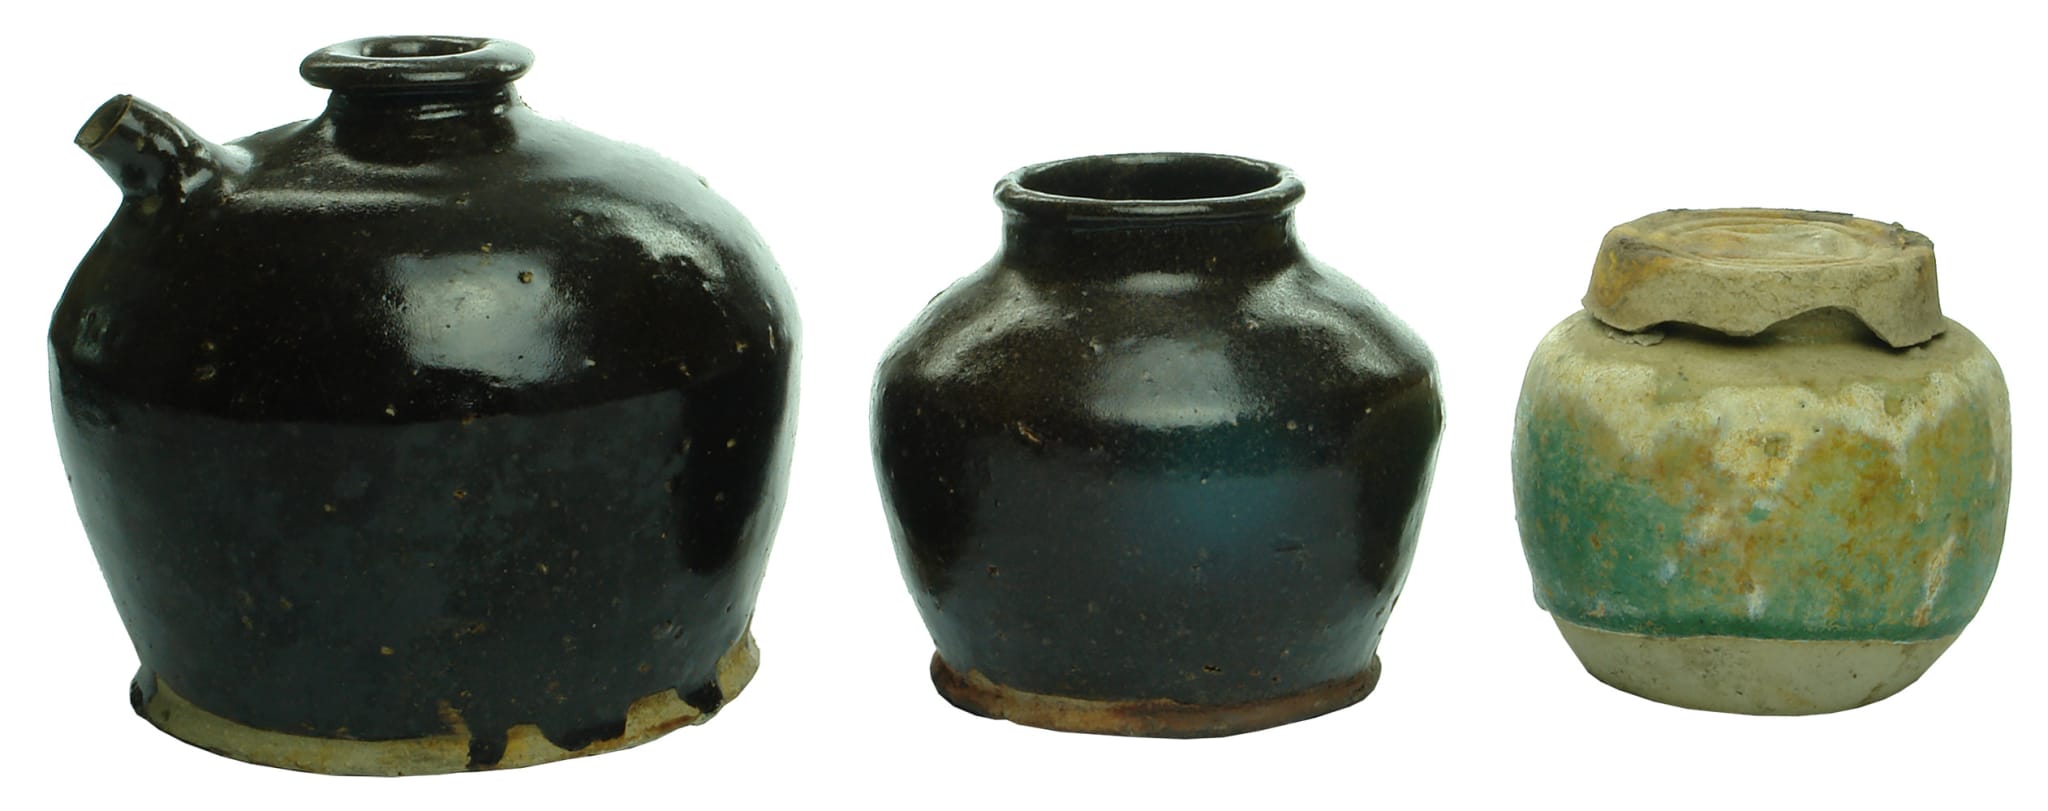 Antique Chinese Pottery Jars Pots